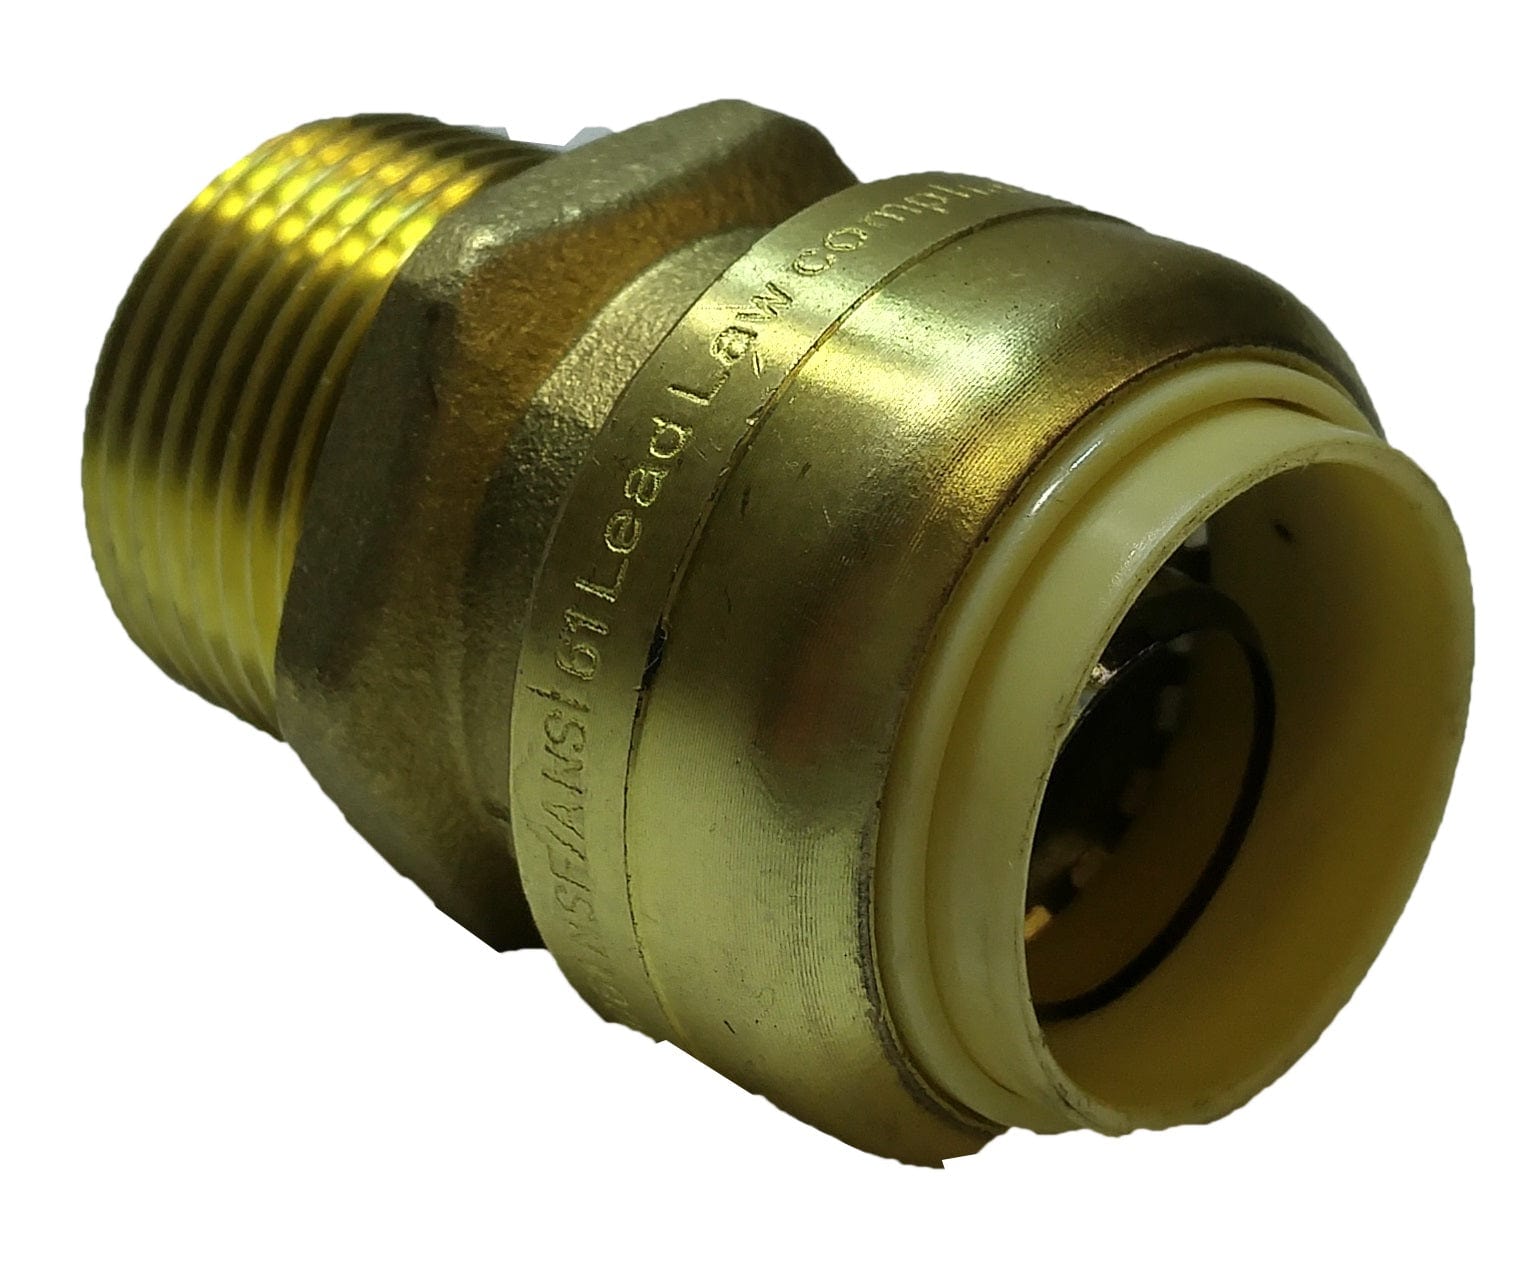 1" x 1" Push-Fit Fitting Male Adapter, Low Lead, NSF.